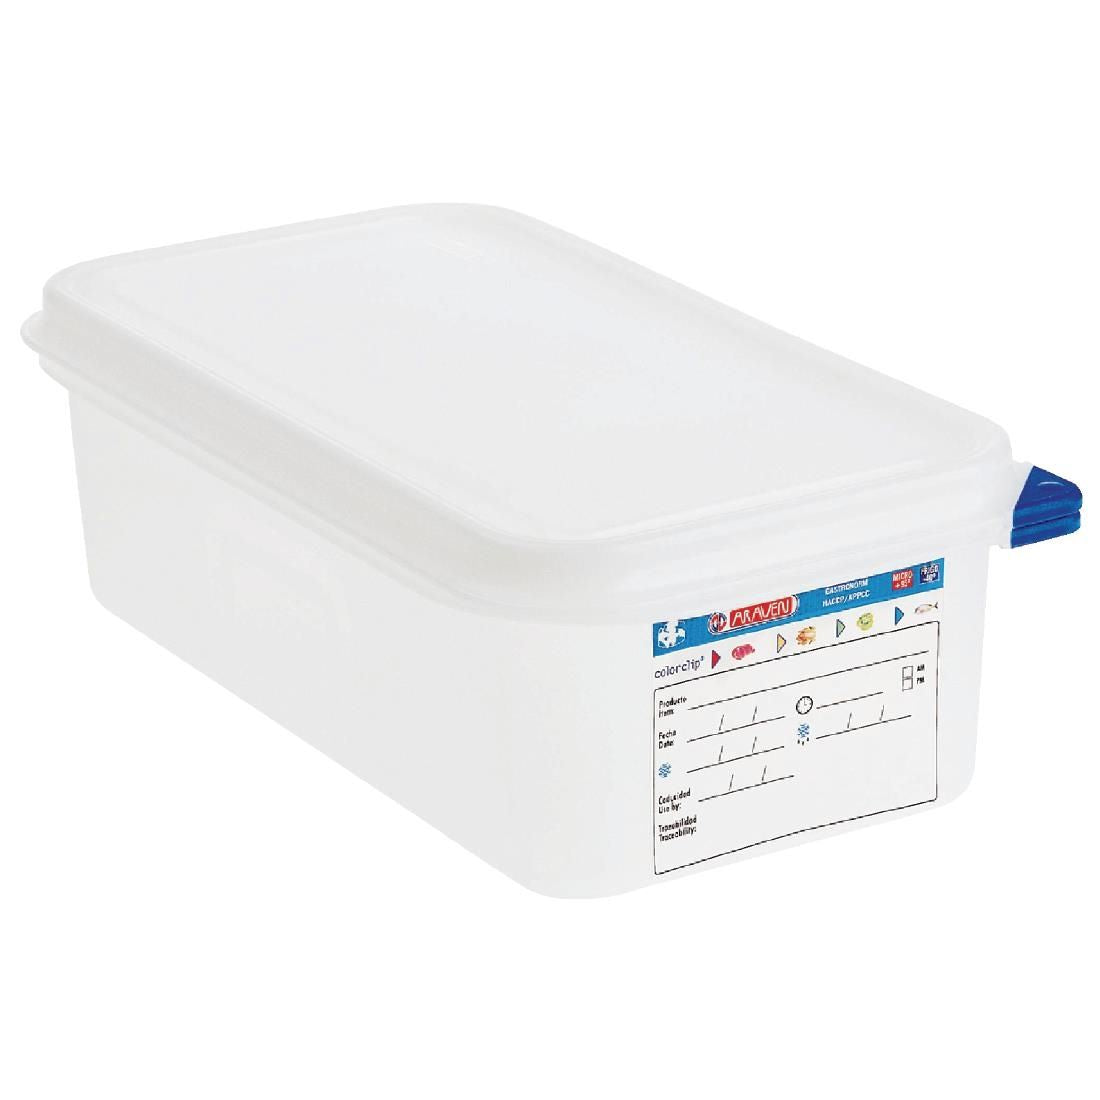 Araven Polypropylene 1/3 Gastronorm Food Container 4Ltr (Pack of 4) JD Catering Equipment Solutions Ltd